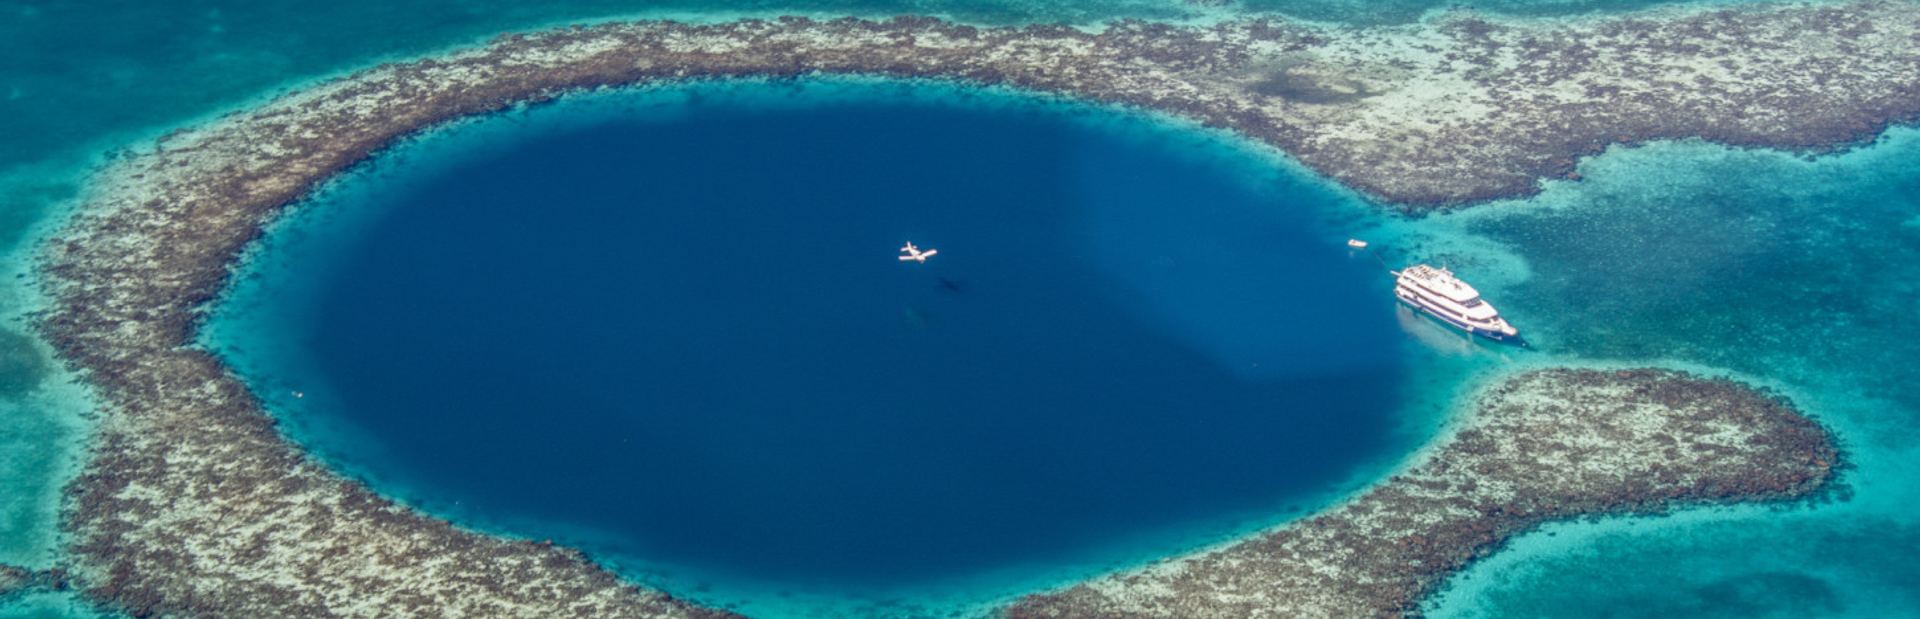 Deep blue: Where to dive in blue holes around the world